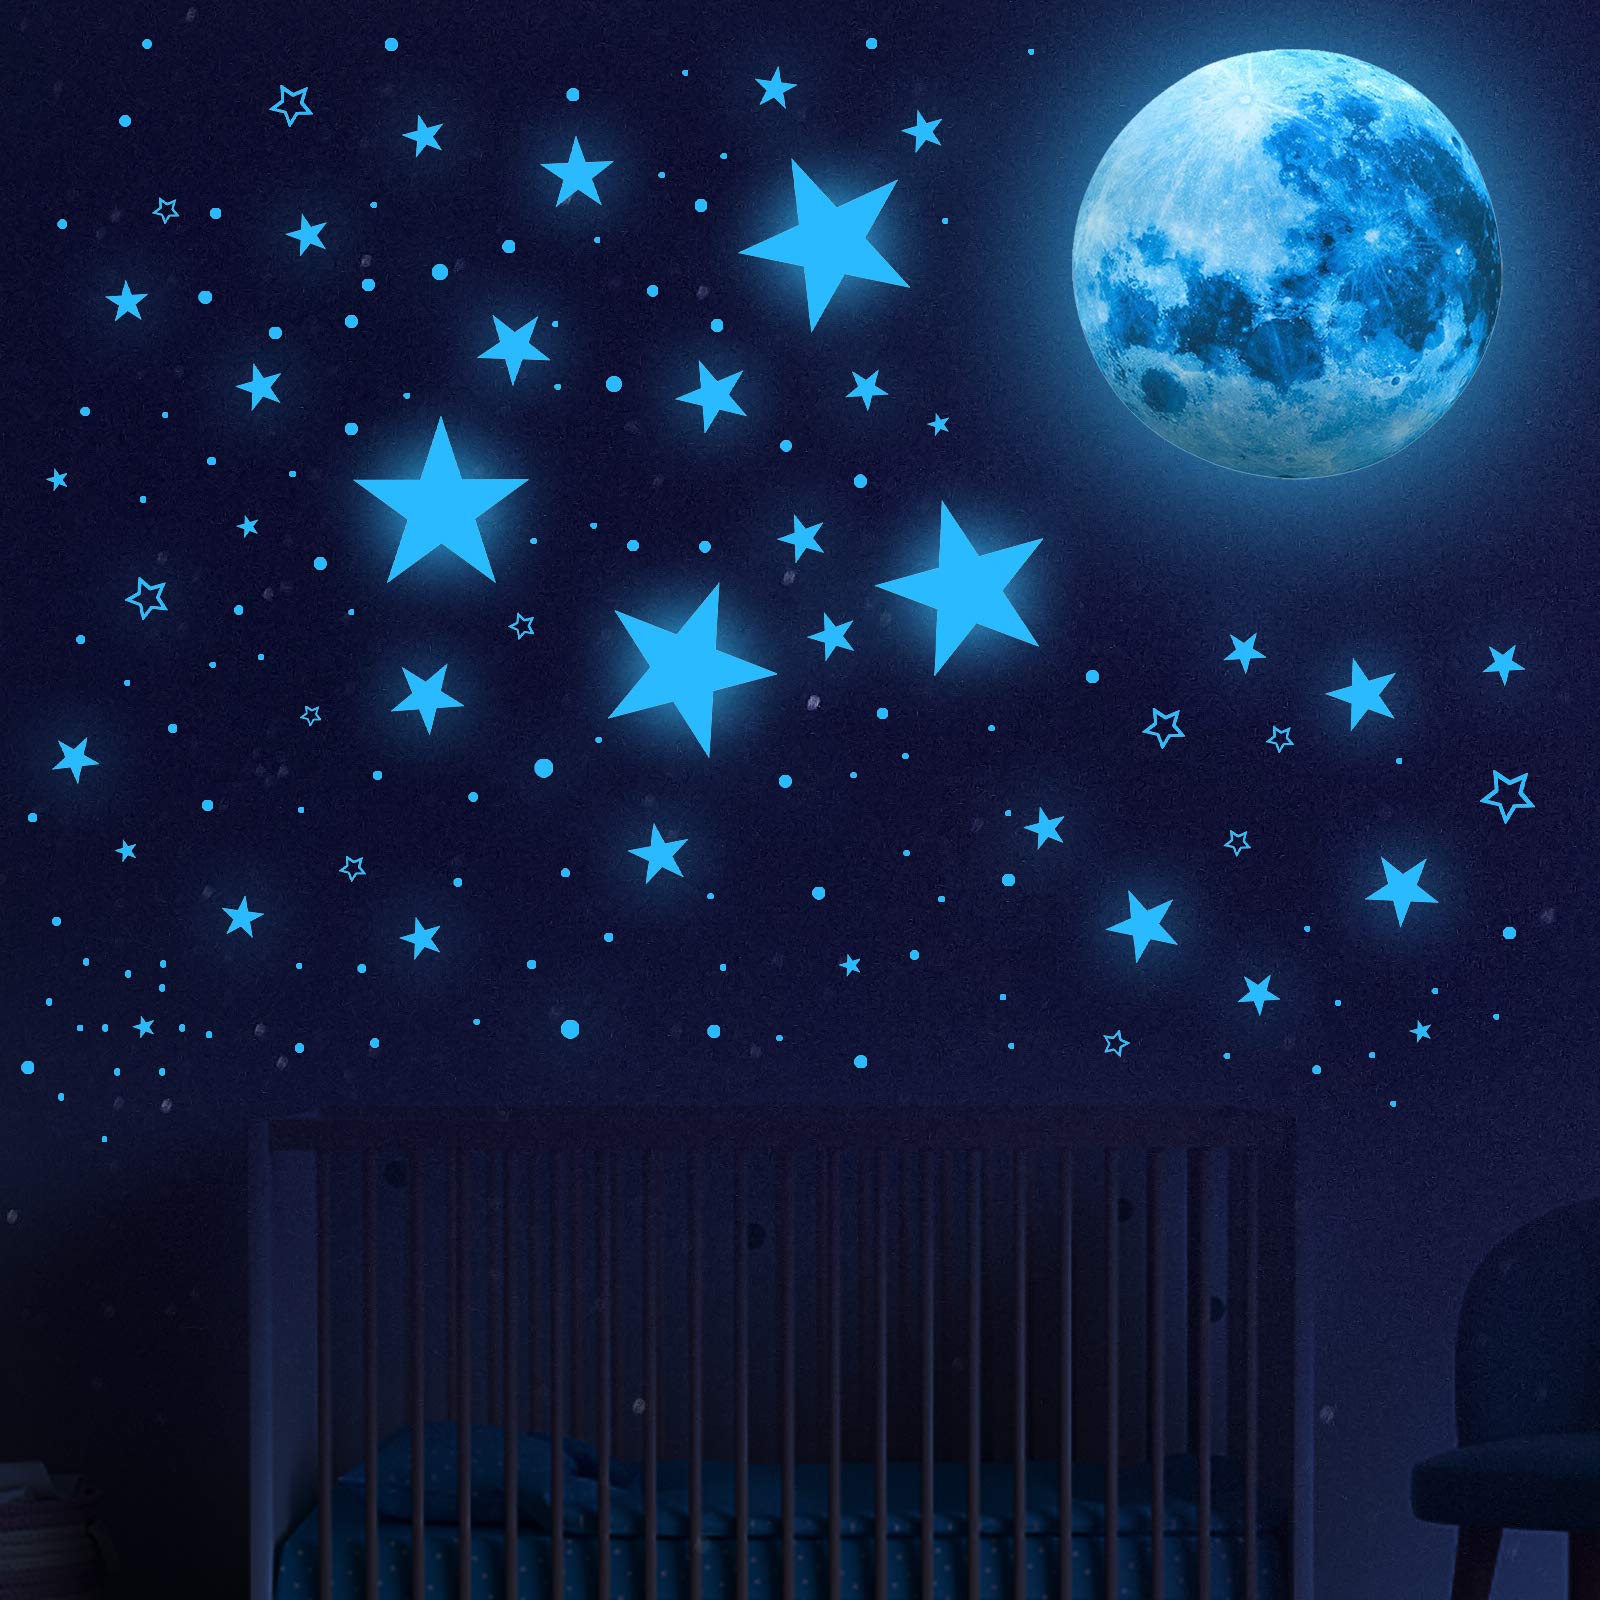 Glow in The Dark Stars for Ceiling,Glow in The Dark Stars and Moon Wall Decals, 1108 Pcs Ceiling Stars Glow in The Dark Kids Wall Decors, Perfect for Kids Nursery Bedroom Living Room(Sky Blue) (Sky Blue)